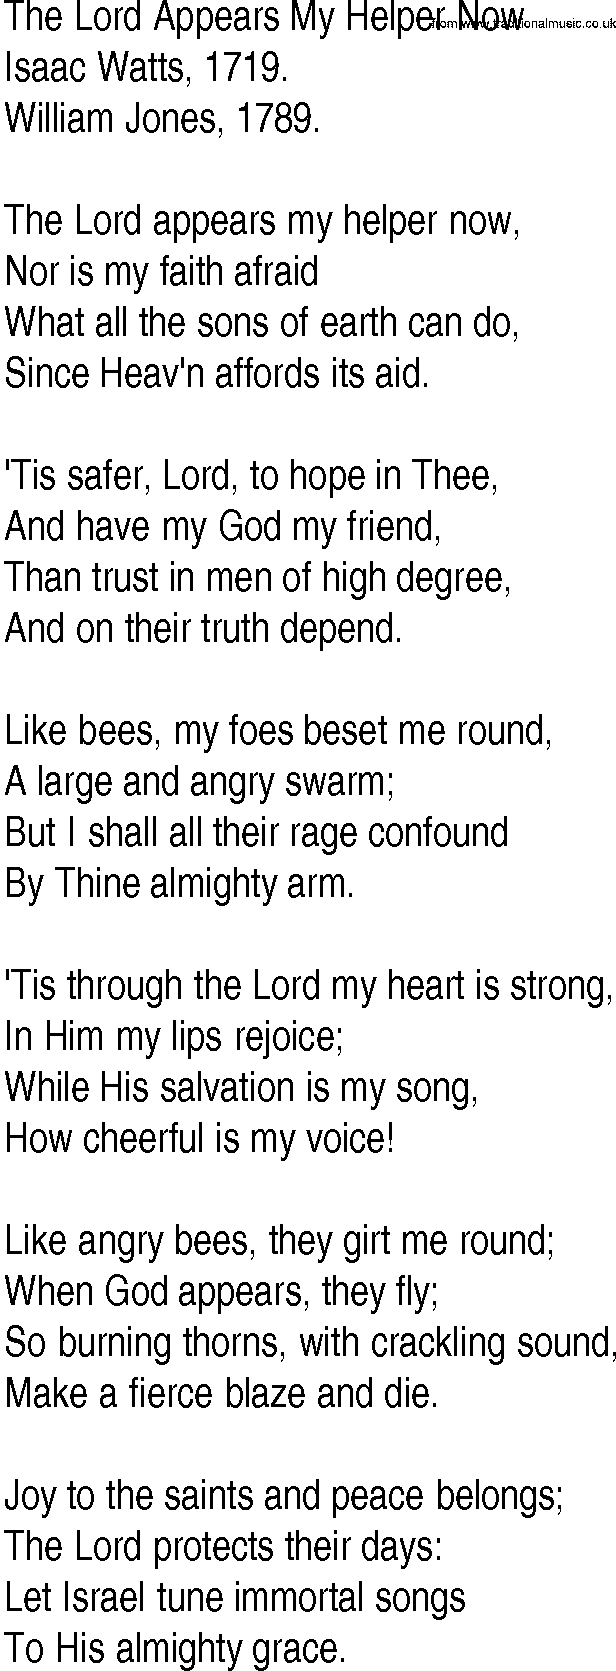 Hymn and Gospel Song: The Lord Appears My Helper Now by Isaac Watts lyrics